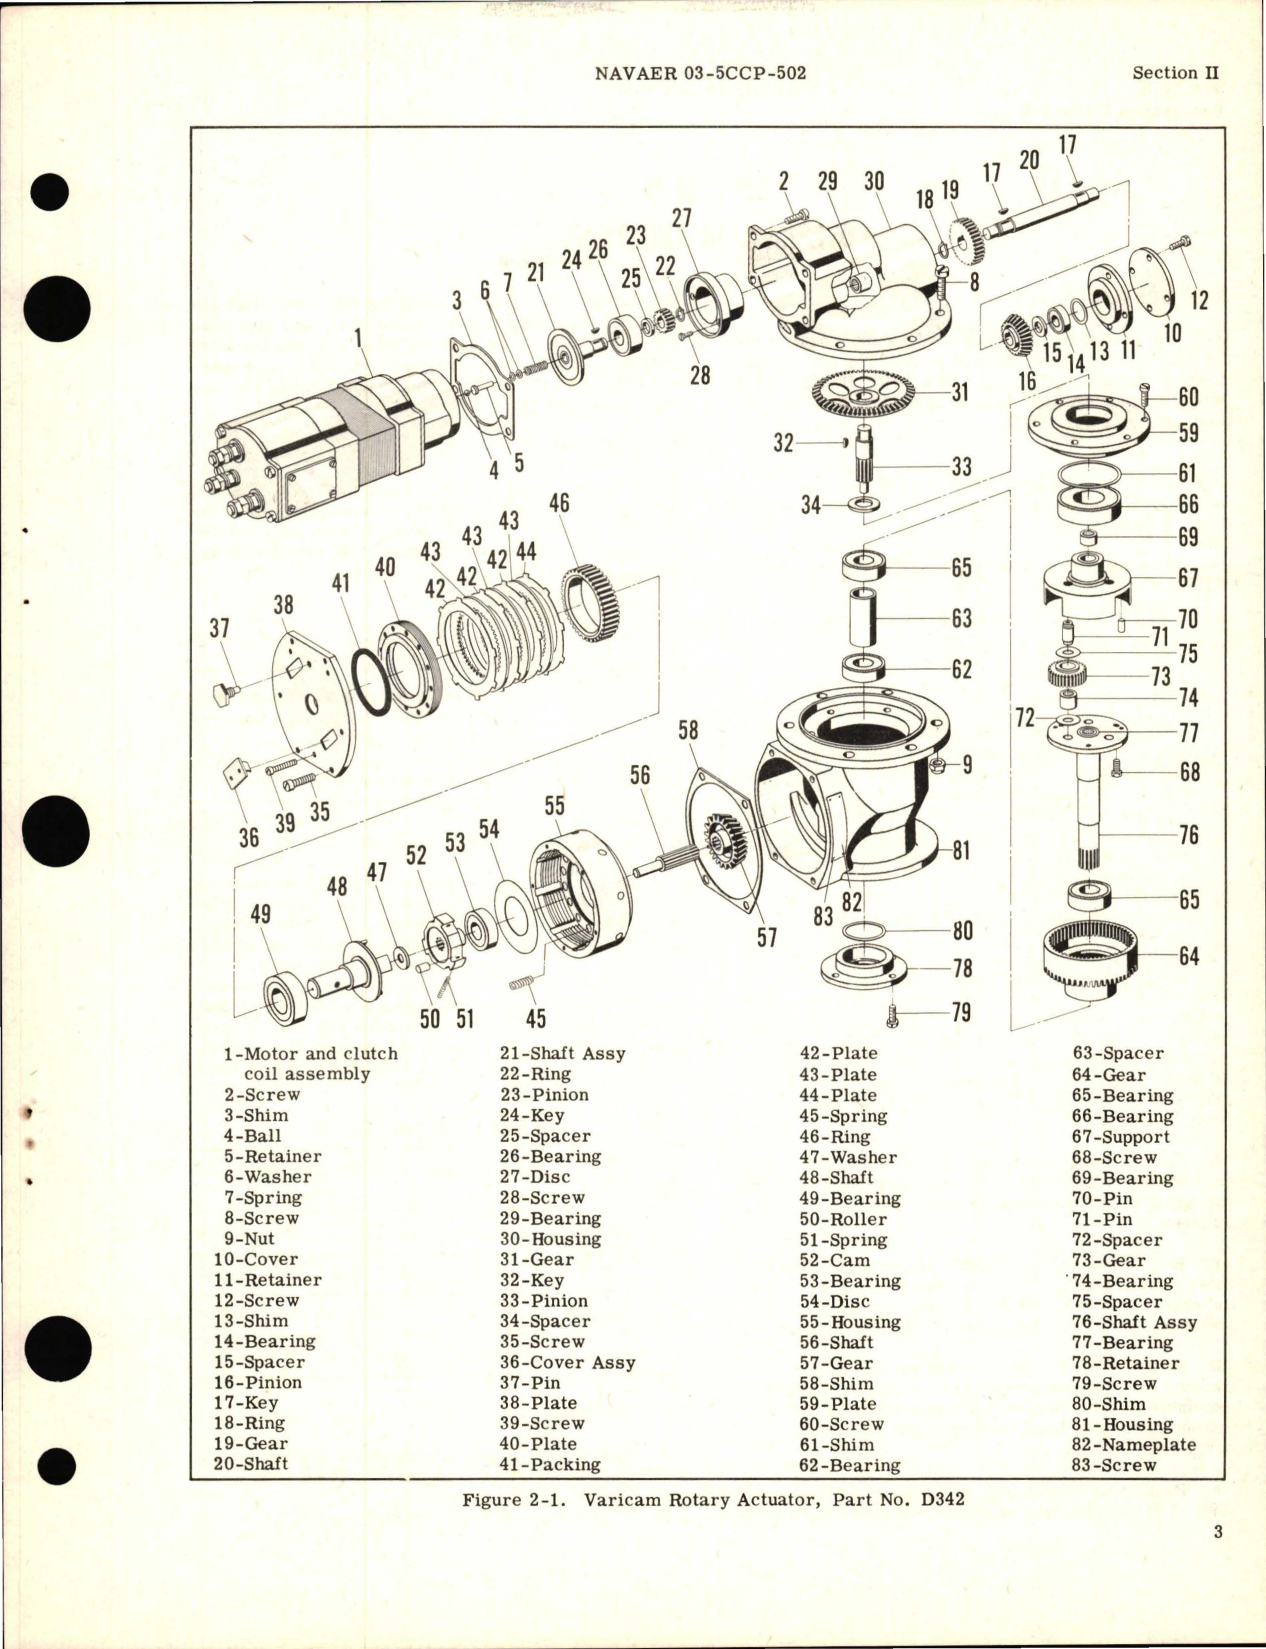 Sample page 5 from AirCorps Library document: Overhaul Instructions for Varicam Rotary Actuators - Part D342, D410, D553, D553-1 and D772 